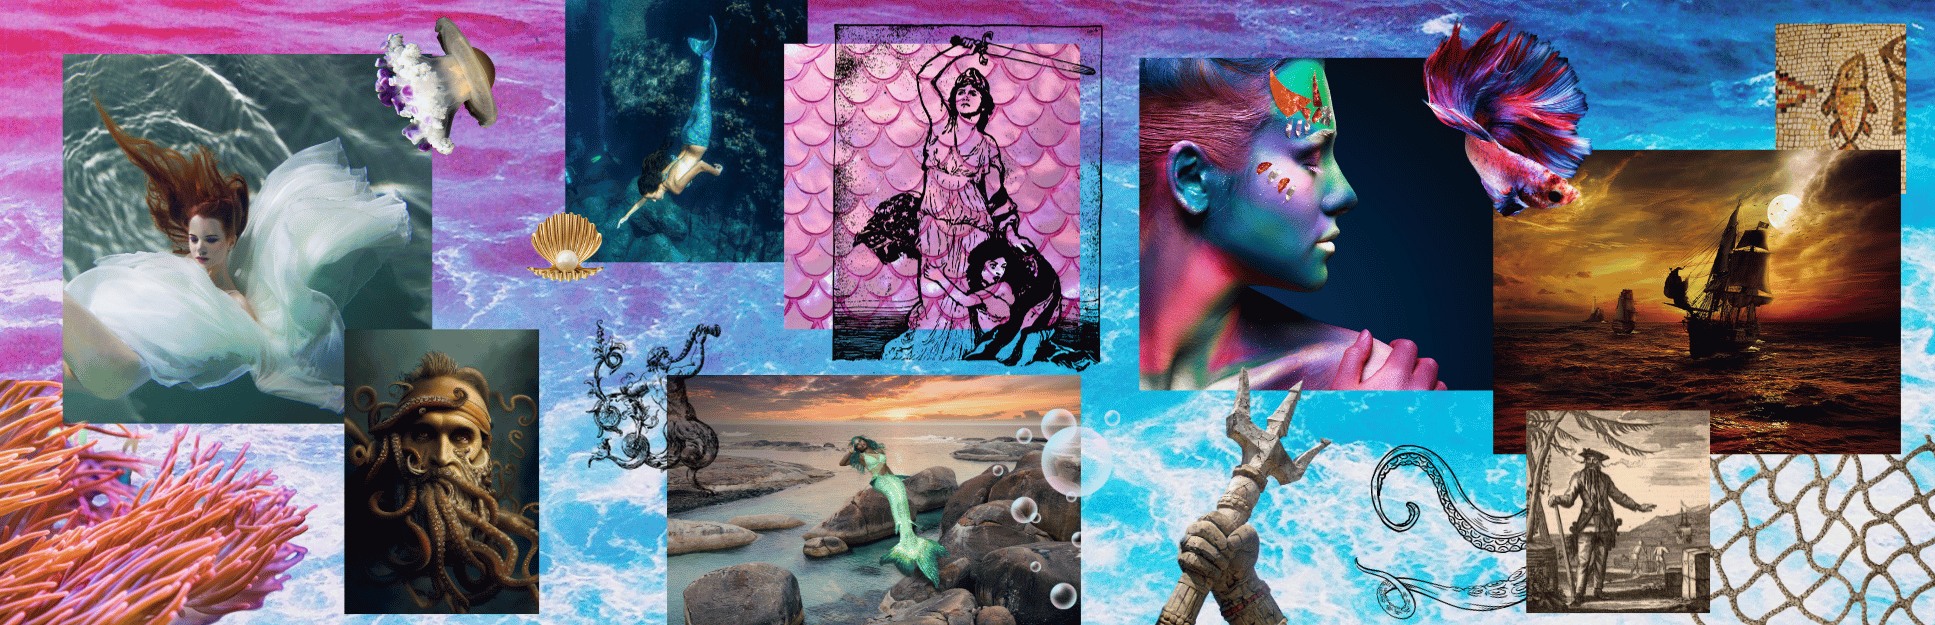 Variety of textures, sea creatures, pirate ships, and more than evoke magical ocean vibes.